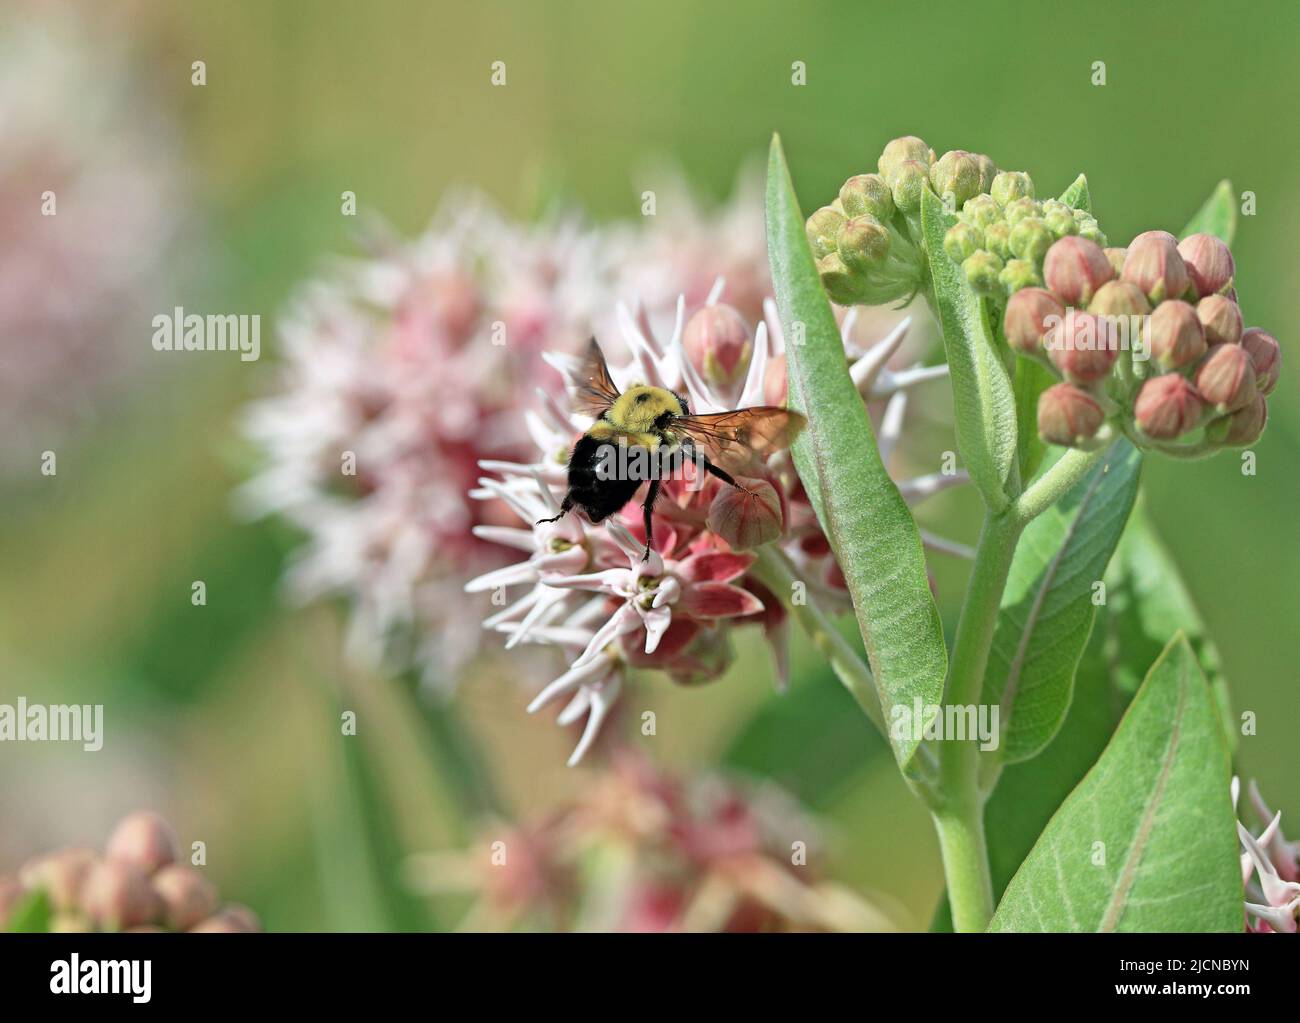 A large Bumblebee flying towards a Showy Milkweed flower with a softly depicted background. Stock Photo